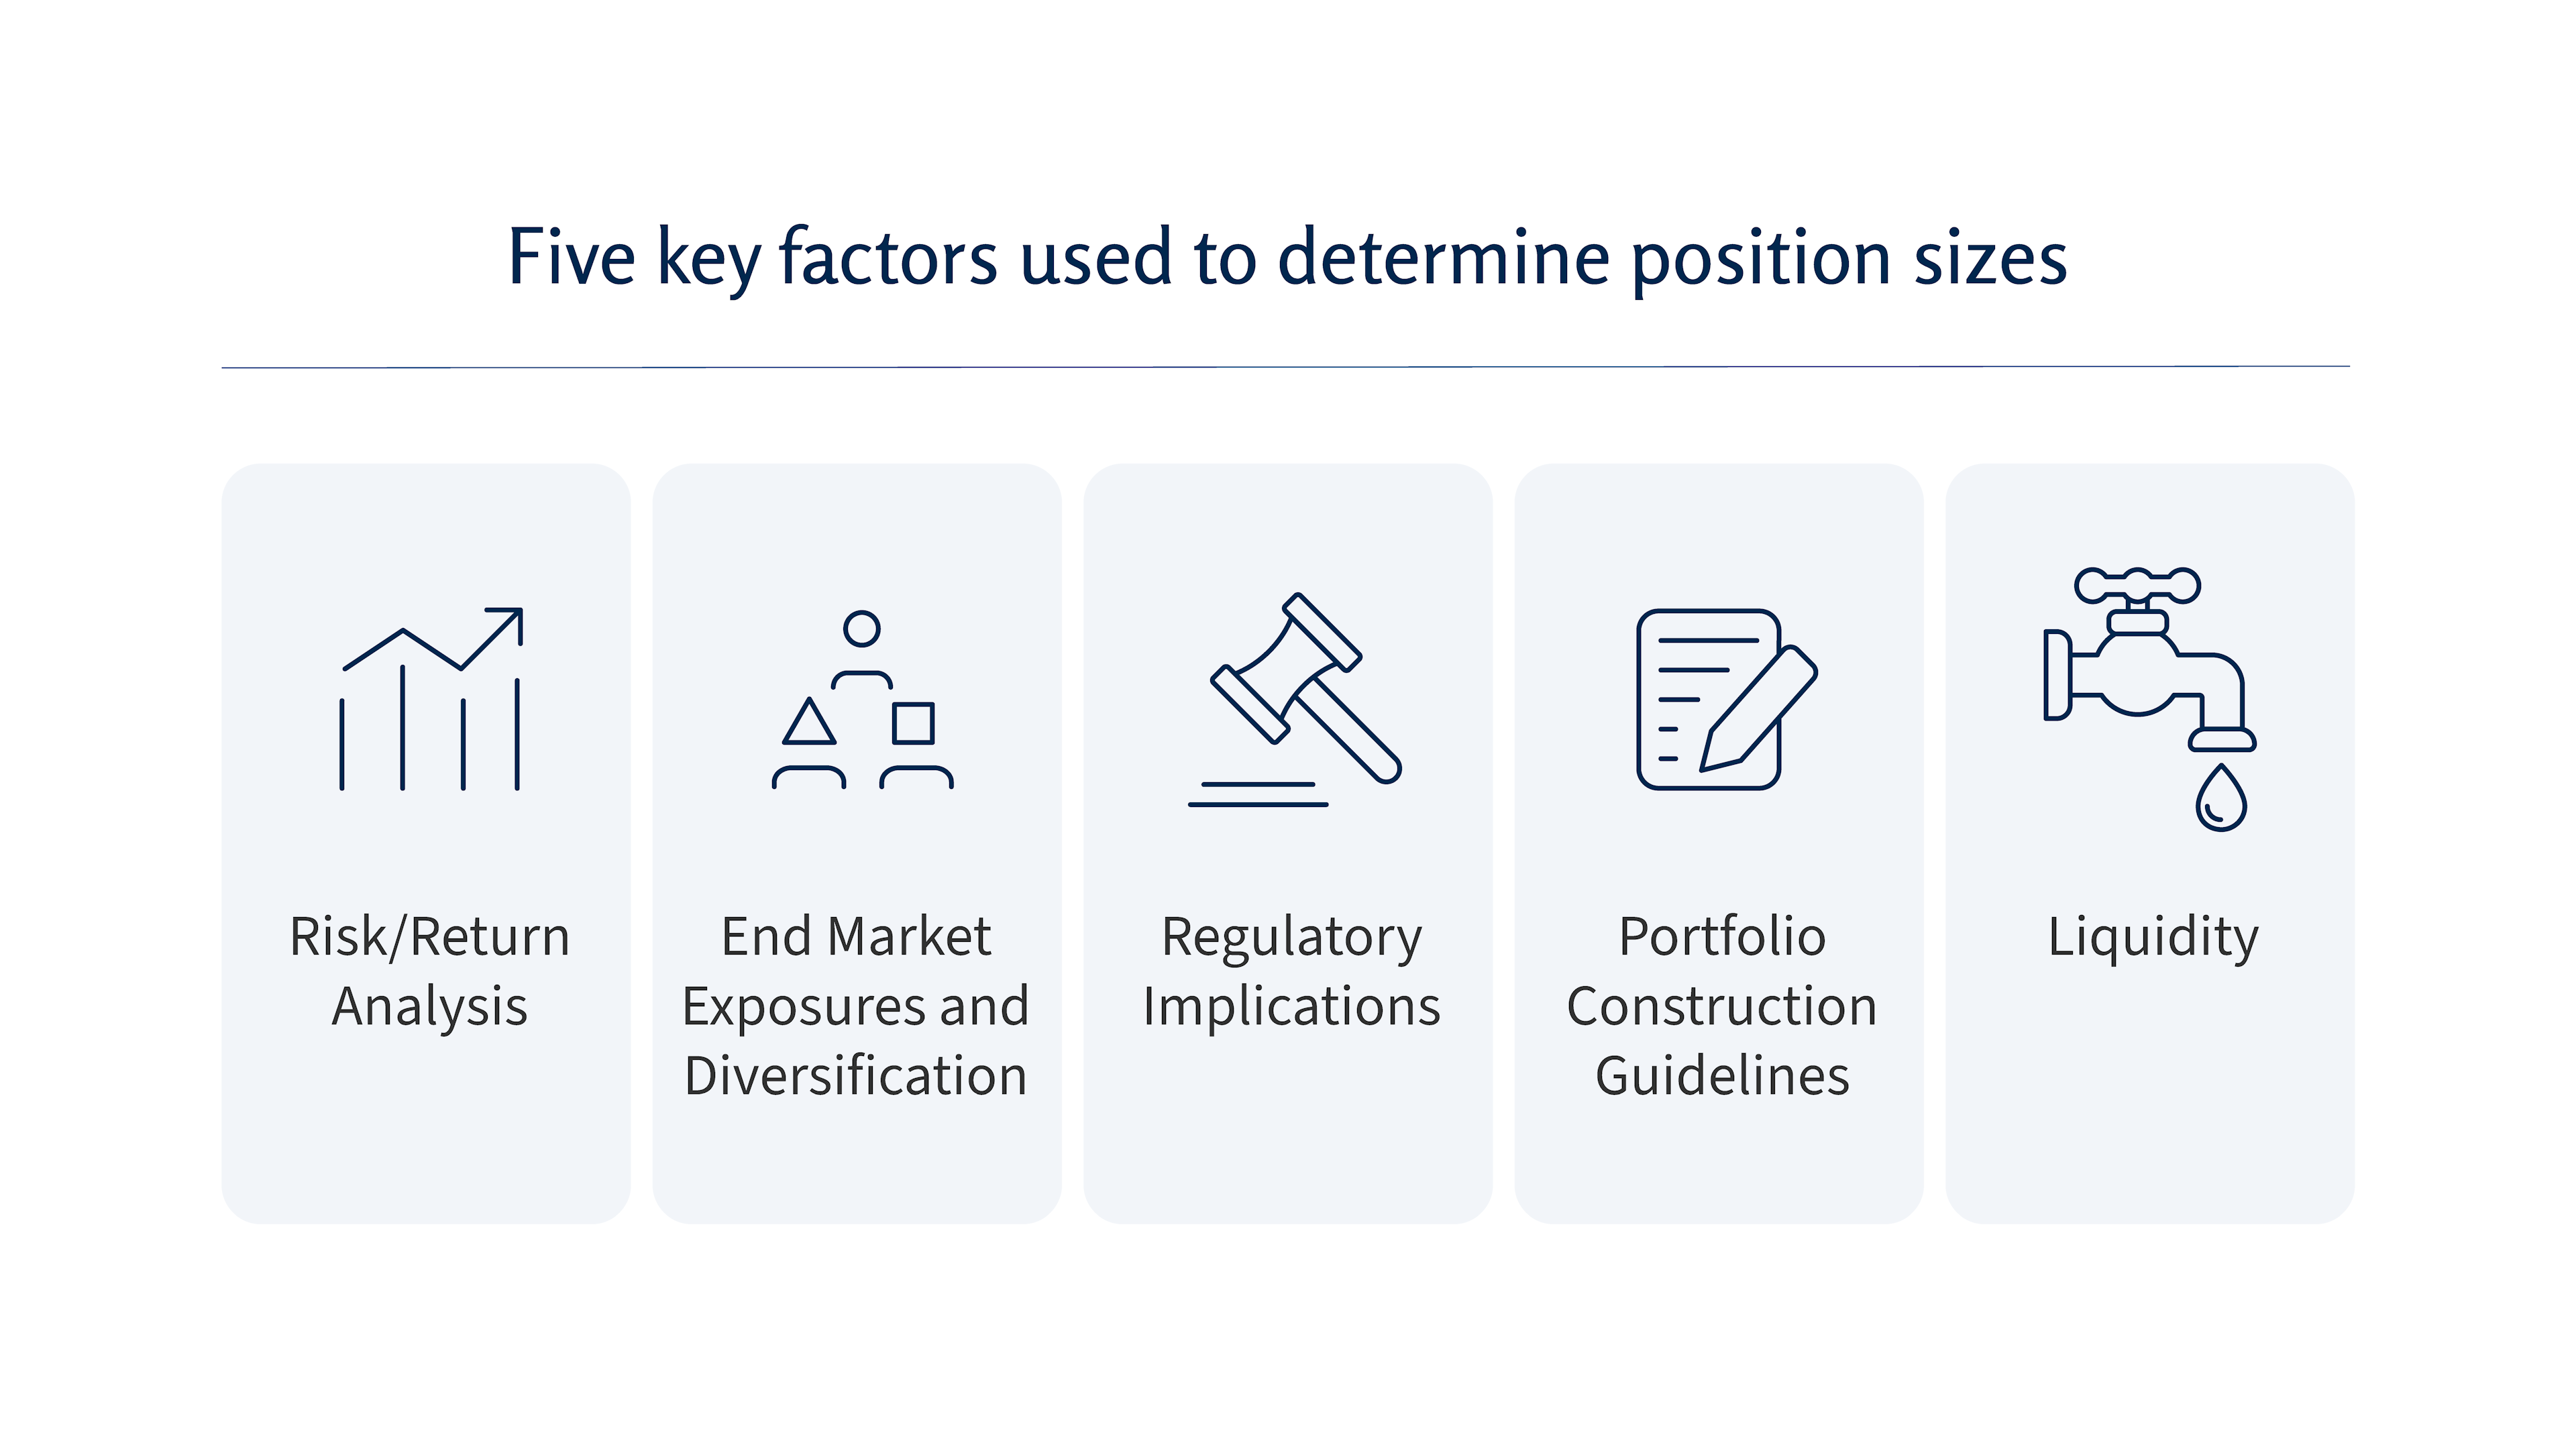 A graphic showing 5 key factors used to determine position sizing